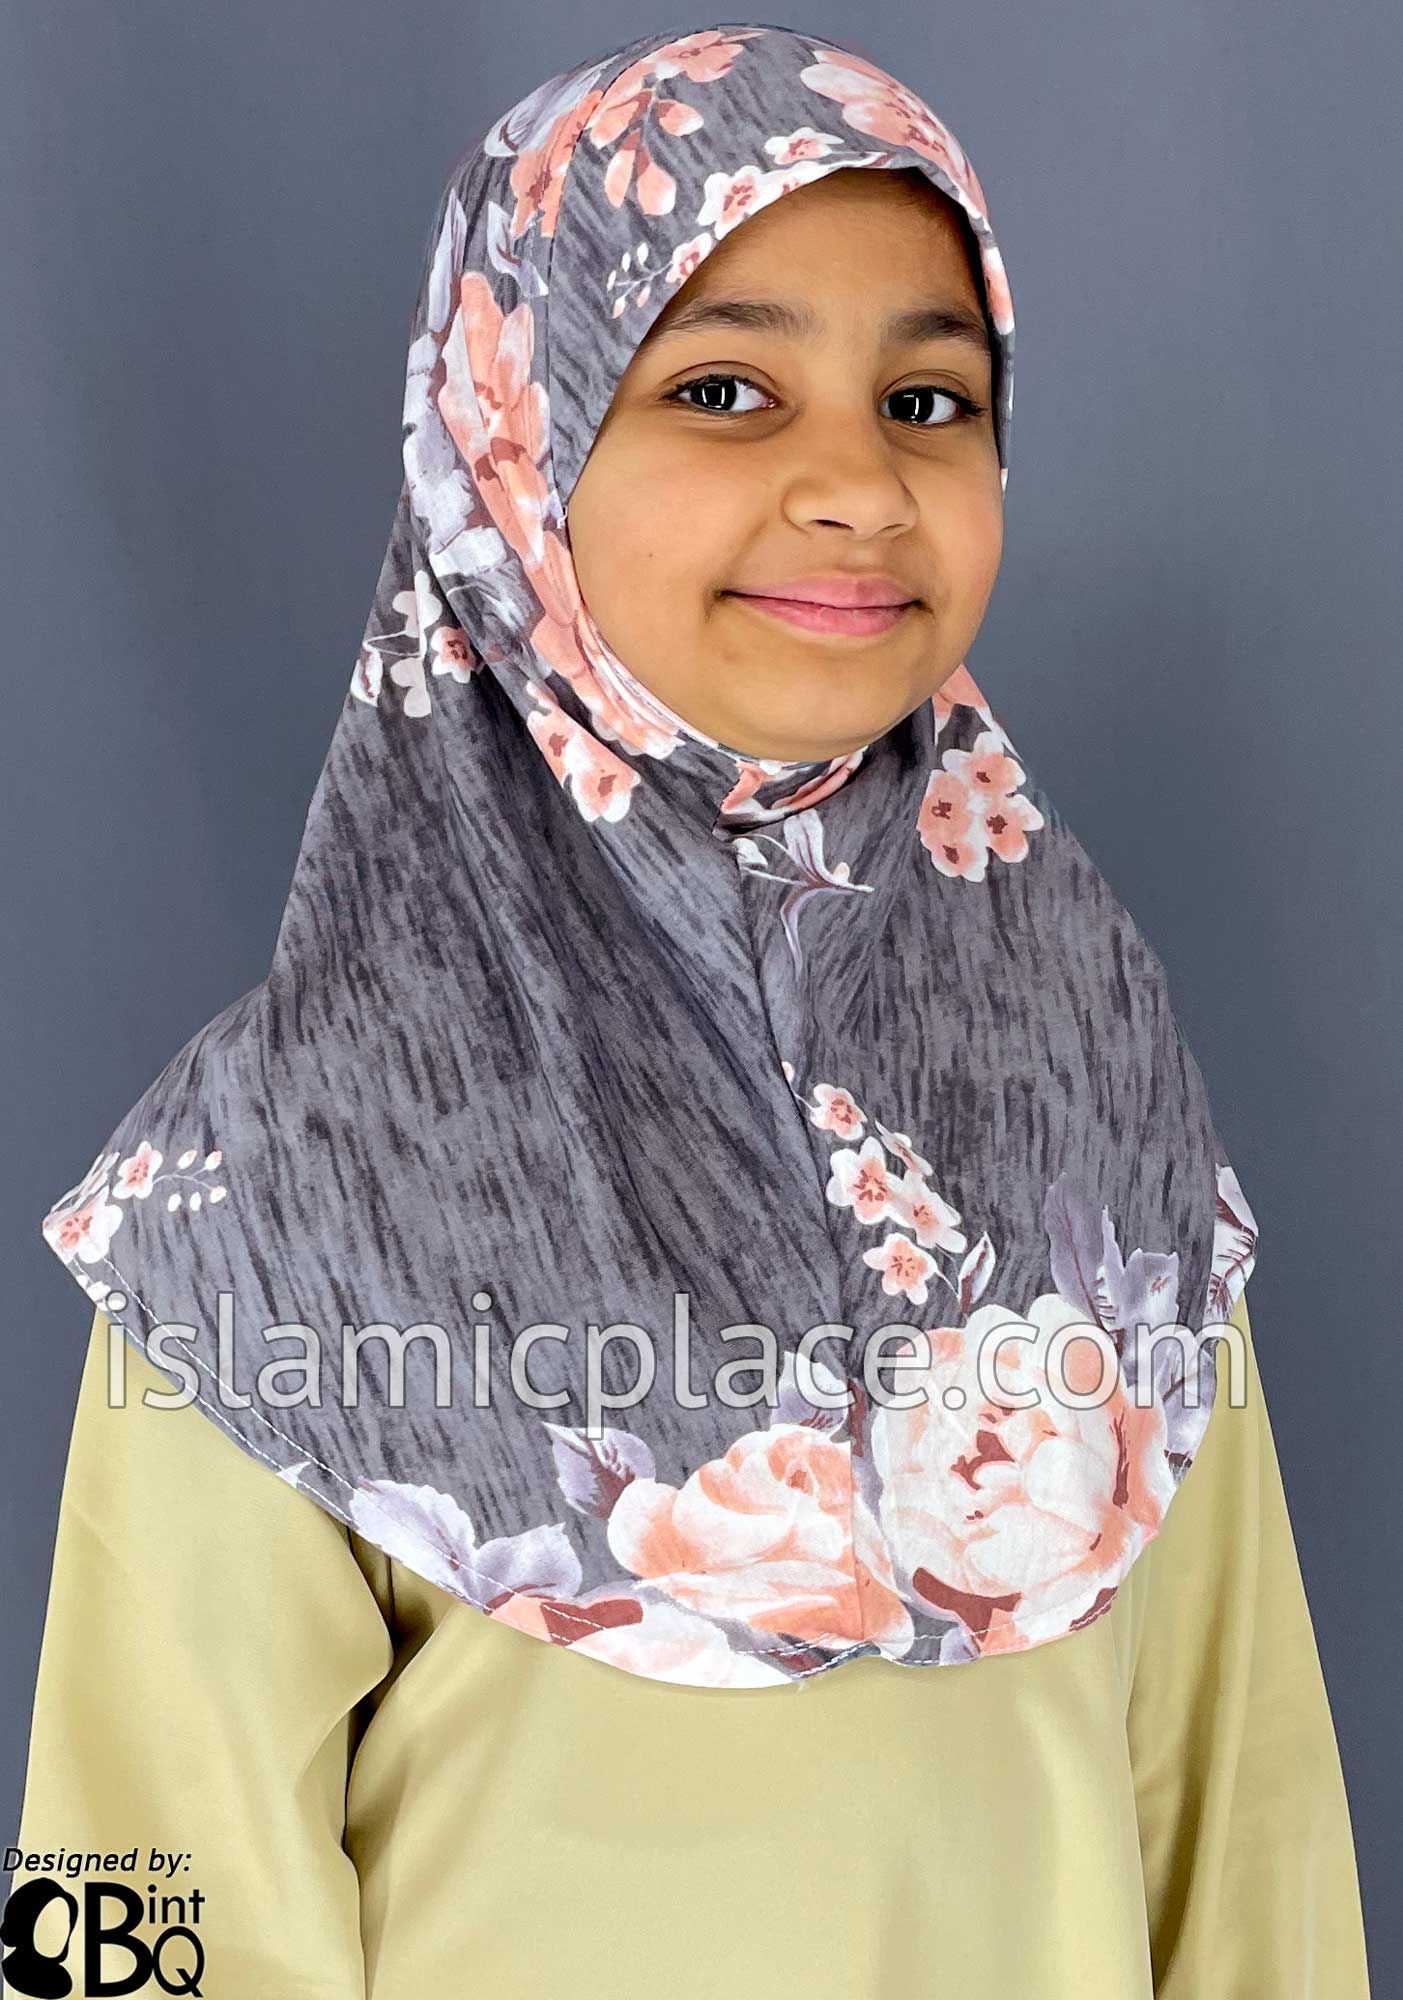 White and Light Coral Floral Design on Gray Base - Printed Girl size (1-piece) Hijab Al-Amira